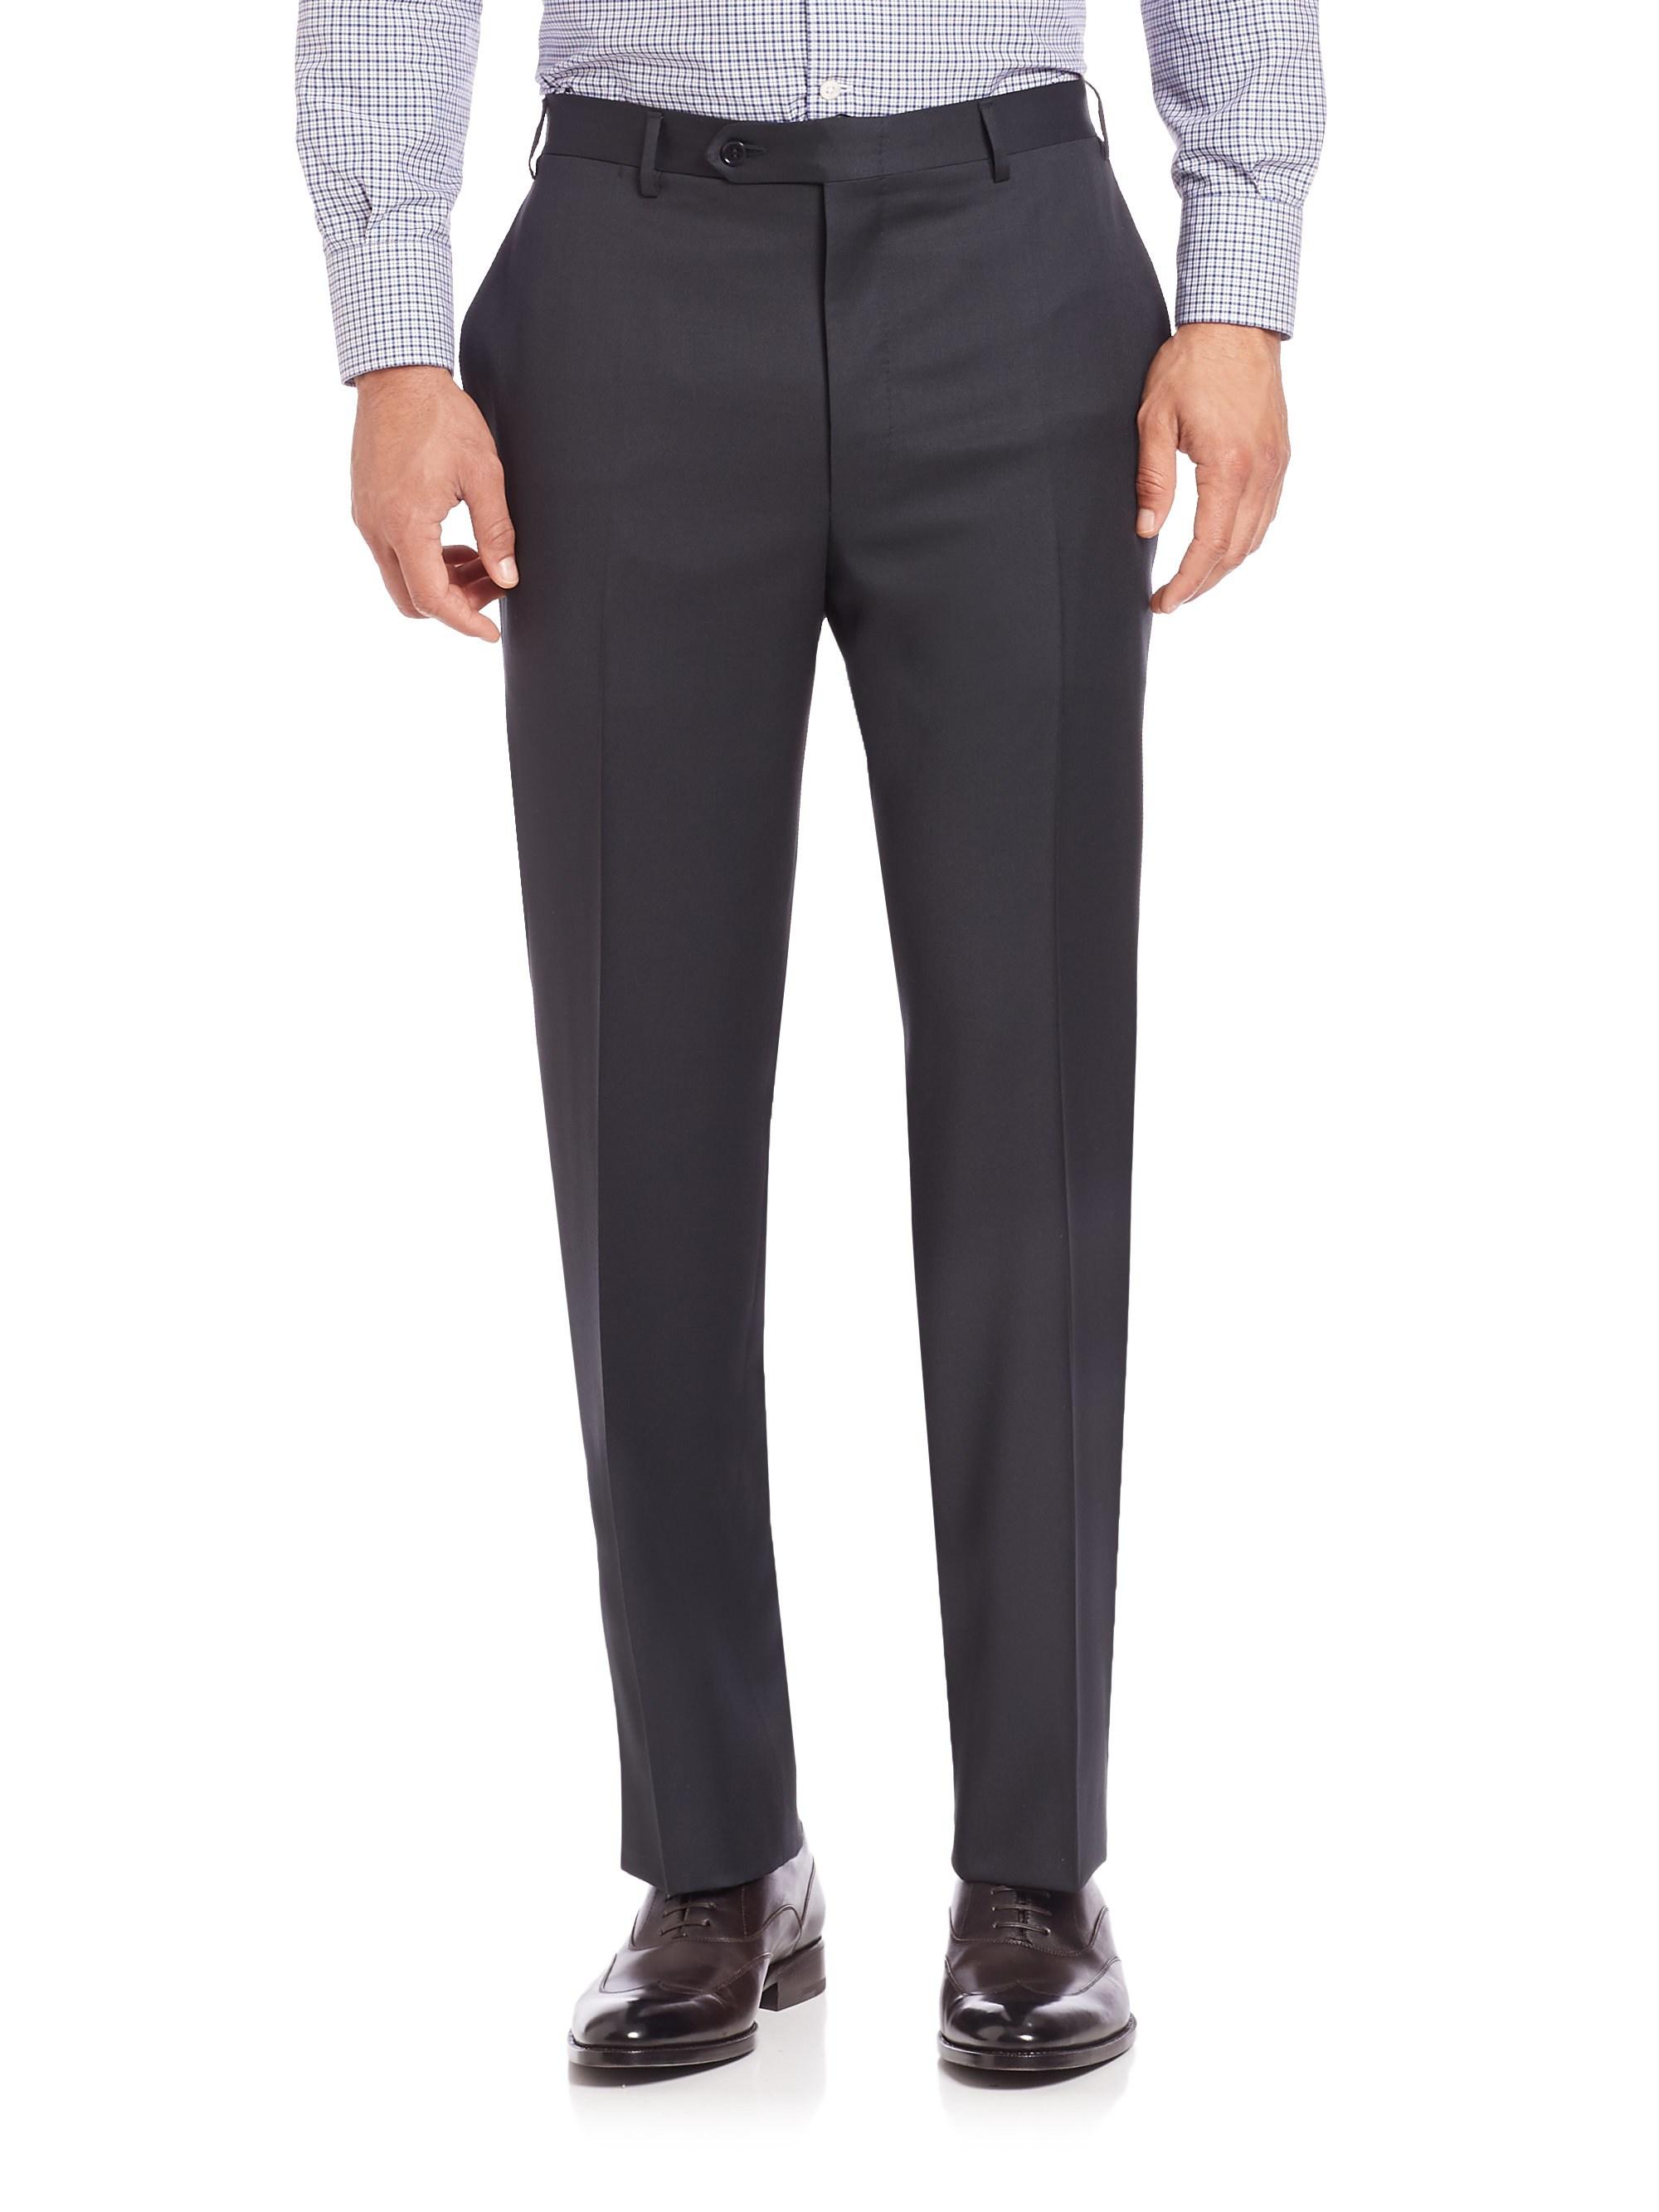 Canali Men's Flat-front Wool Trousers - Navy in Blue for Men - Lyst